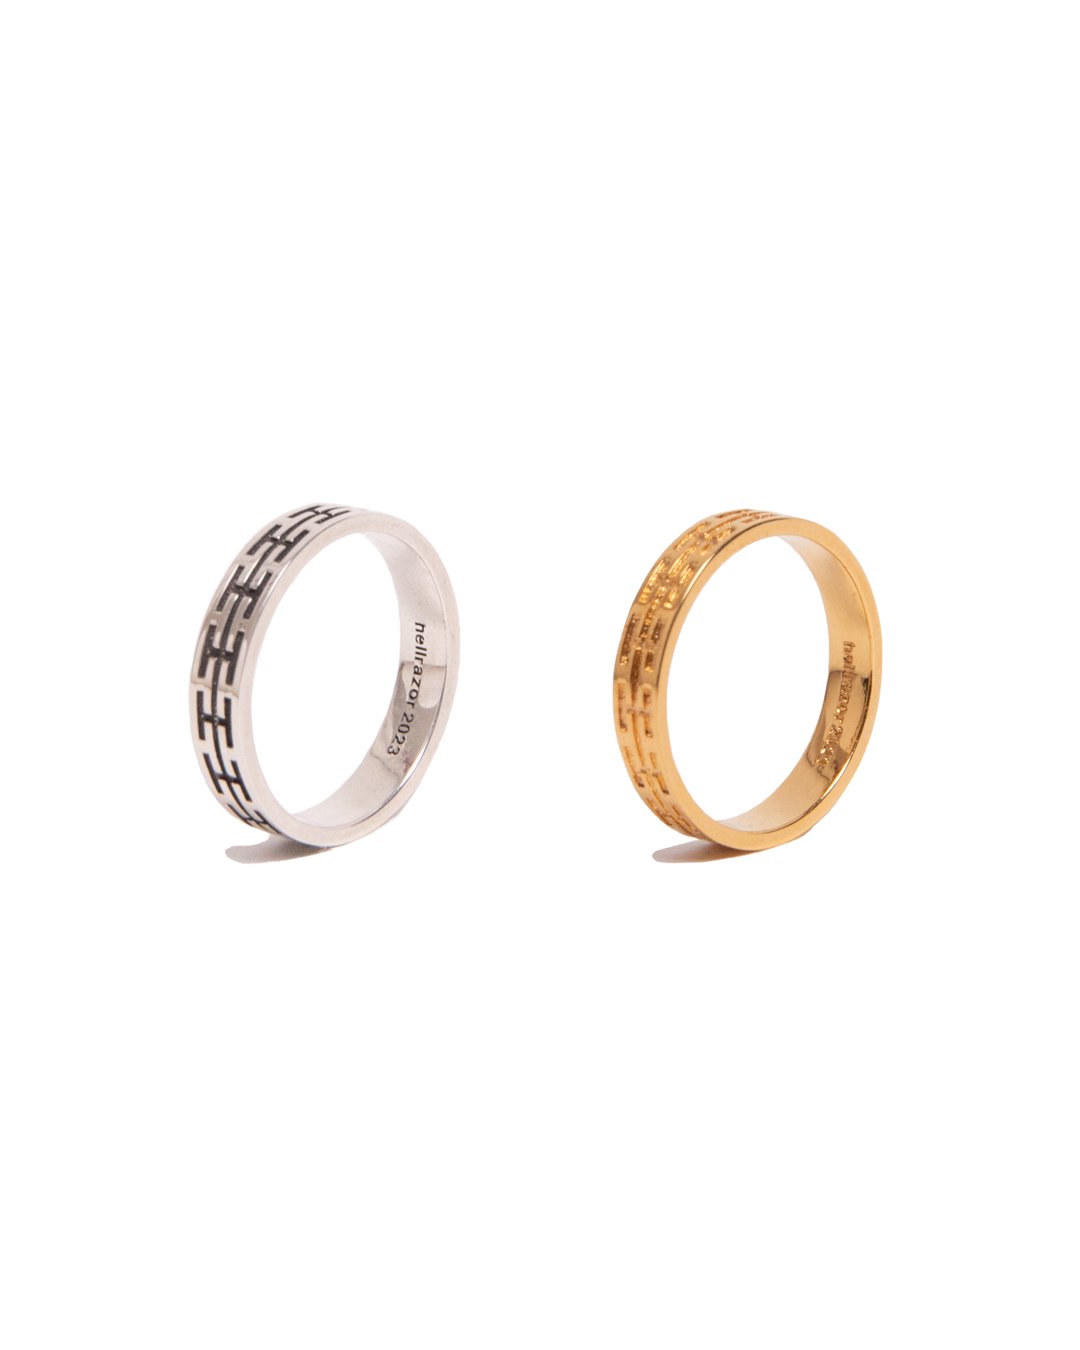 H CHAIN RING - S.Silver, B.Gold